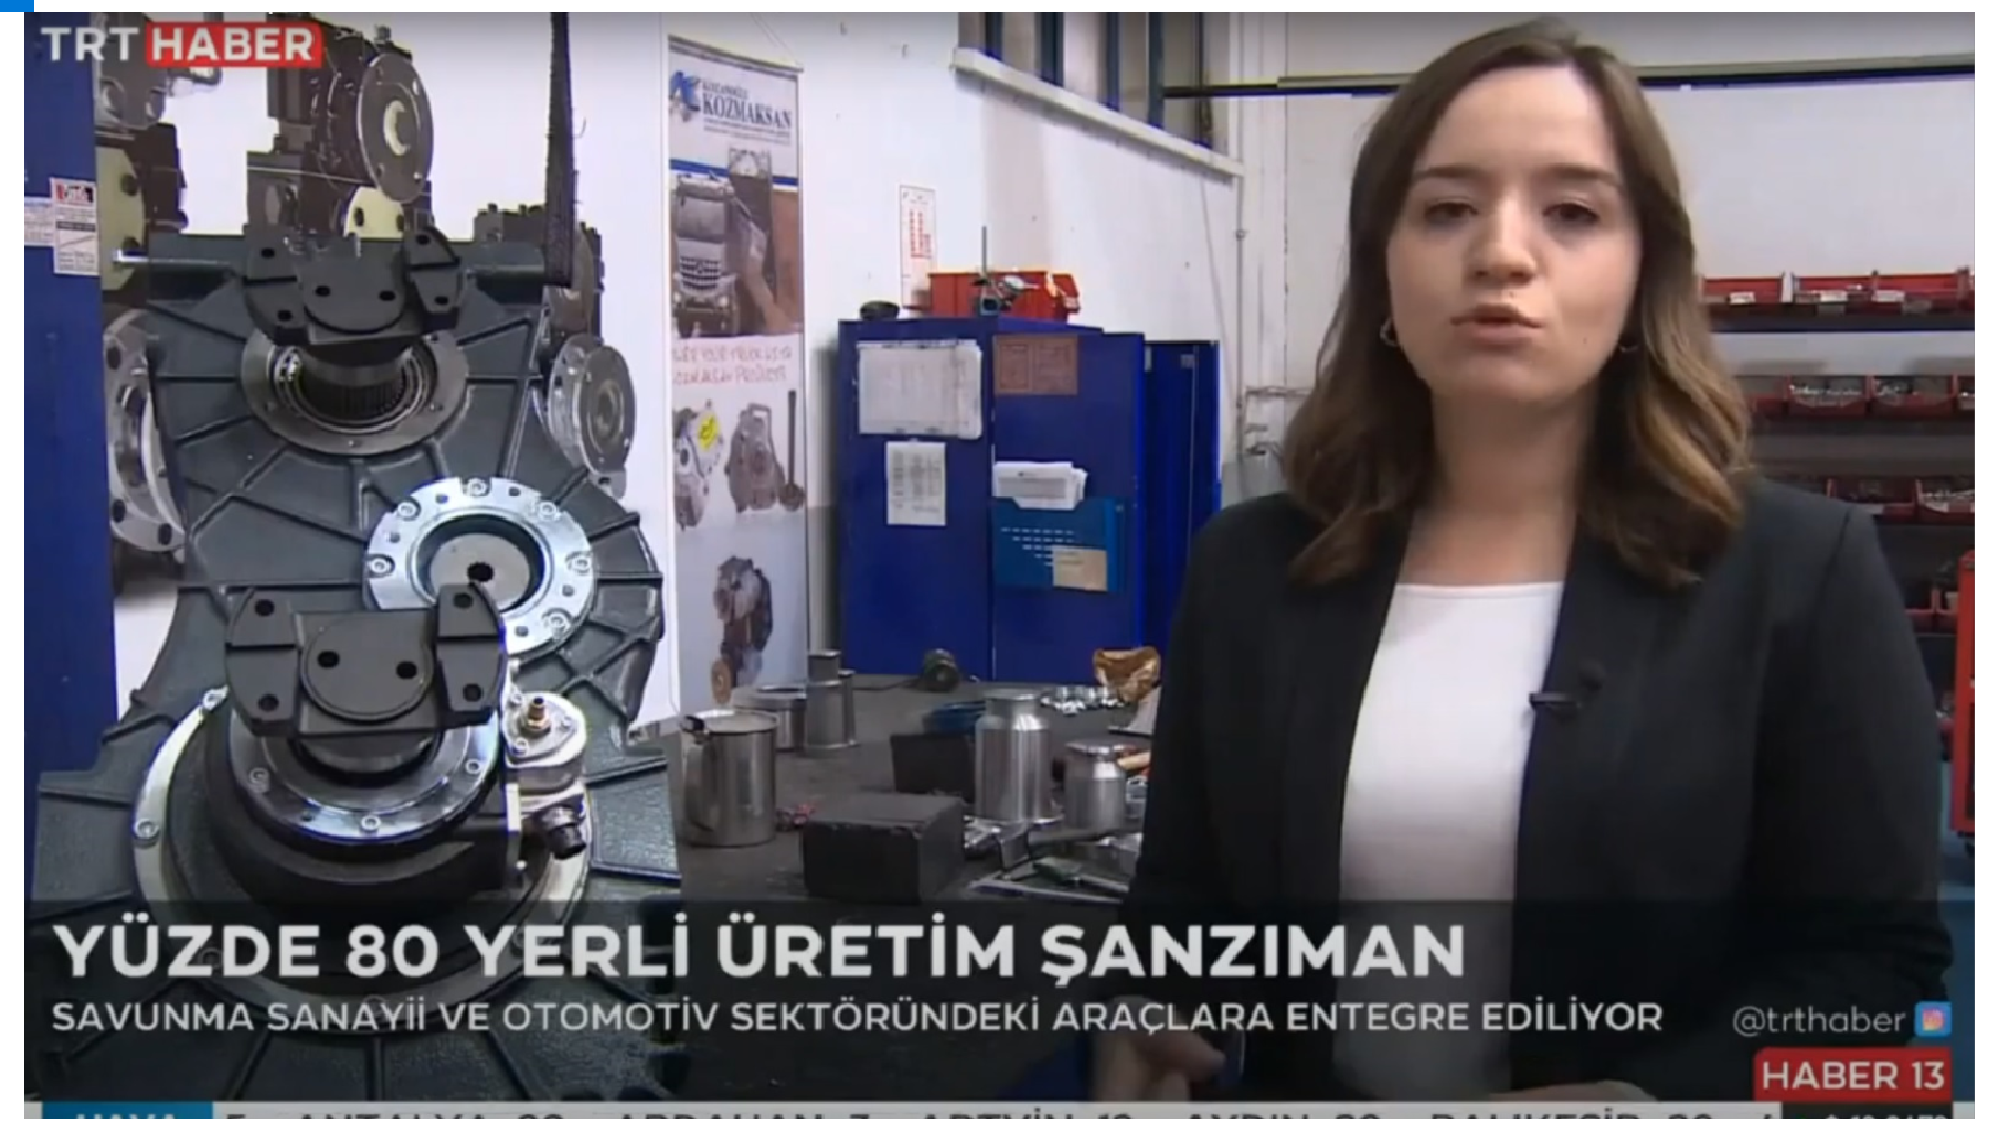 Kozmaksan products and facilities on national TV introducing the contributions to the national economy and industry.